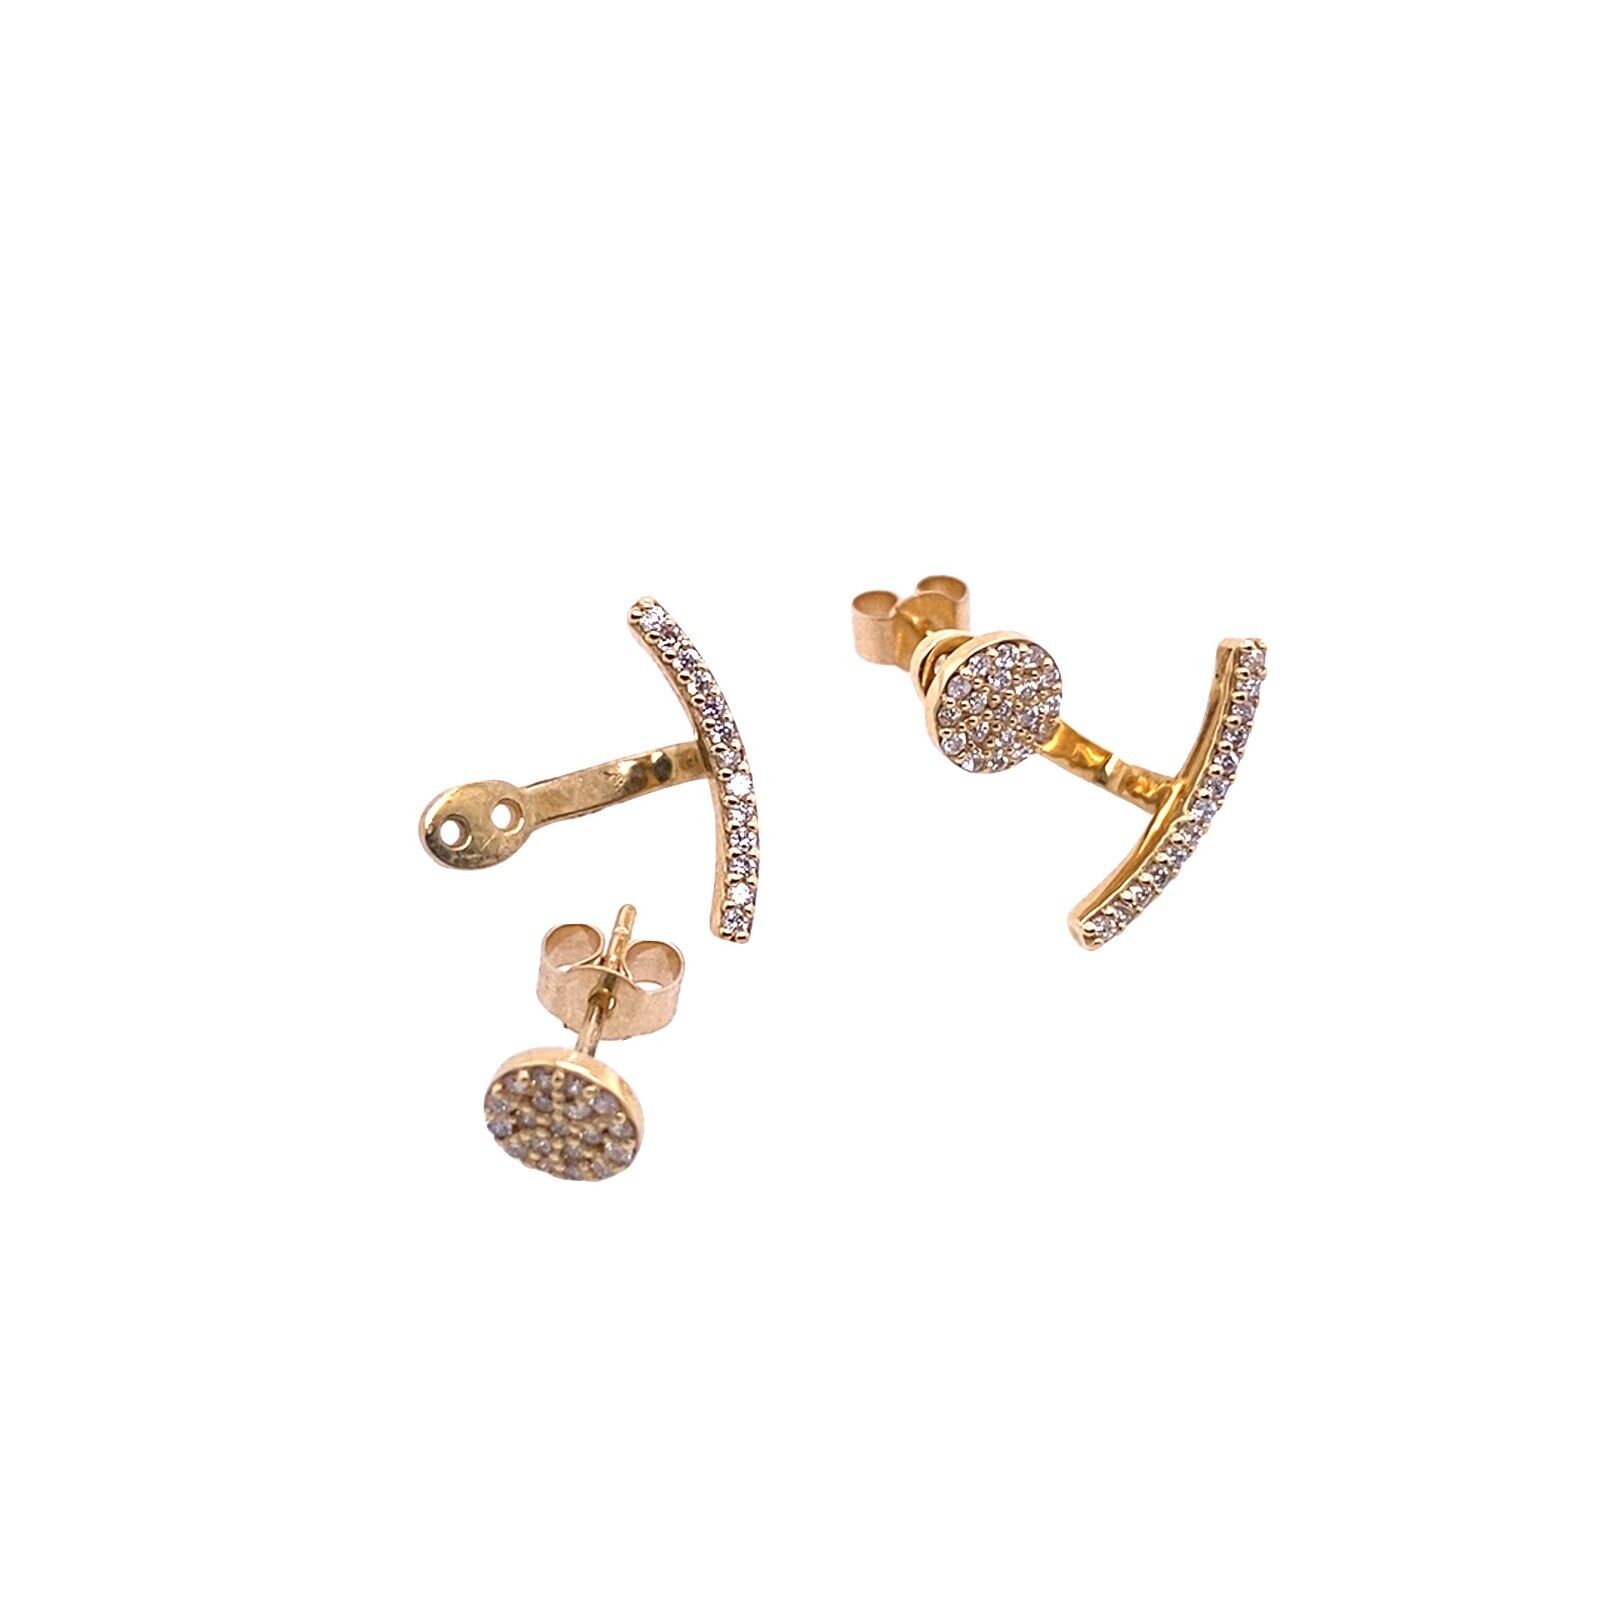 Fine Quality Drops & Studs Earrings Set with Diamonds in 18ct Yellow Gold

This is a perfect pair of earrings for every day look. These earrings feature a total of 0.50ct of Diamonds. The pair is set in 18ct Yellow Gold, drop & studs